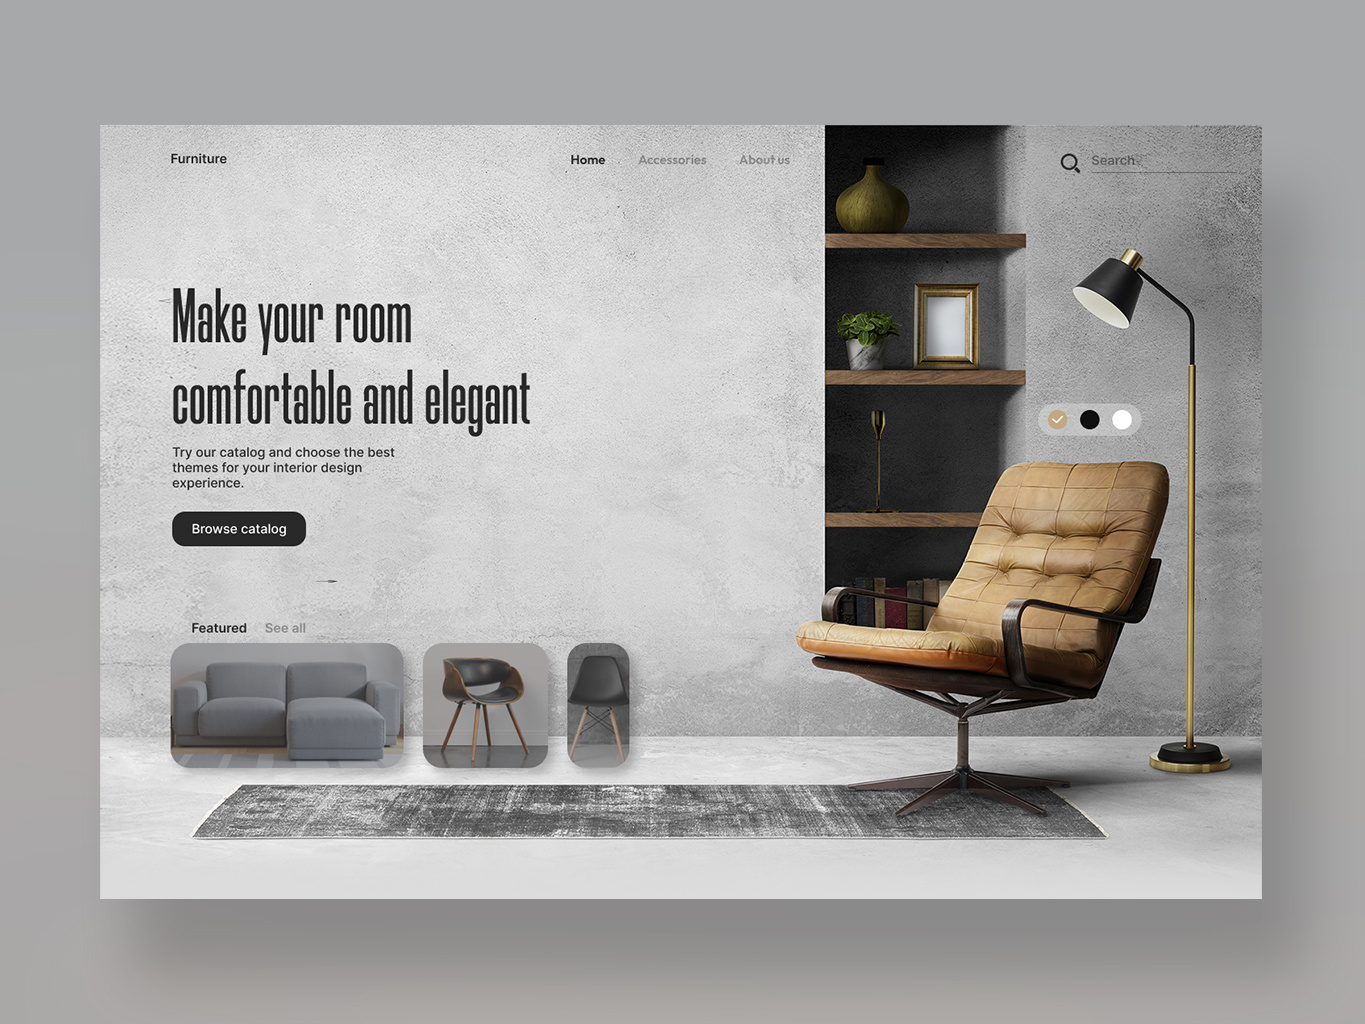 Furniture Shopping Website UI by Trung Mai Đức on Dribbble